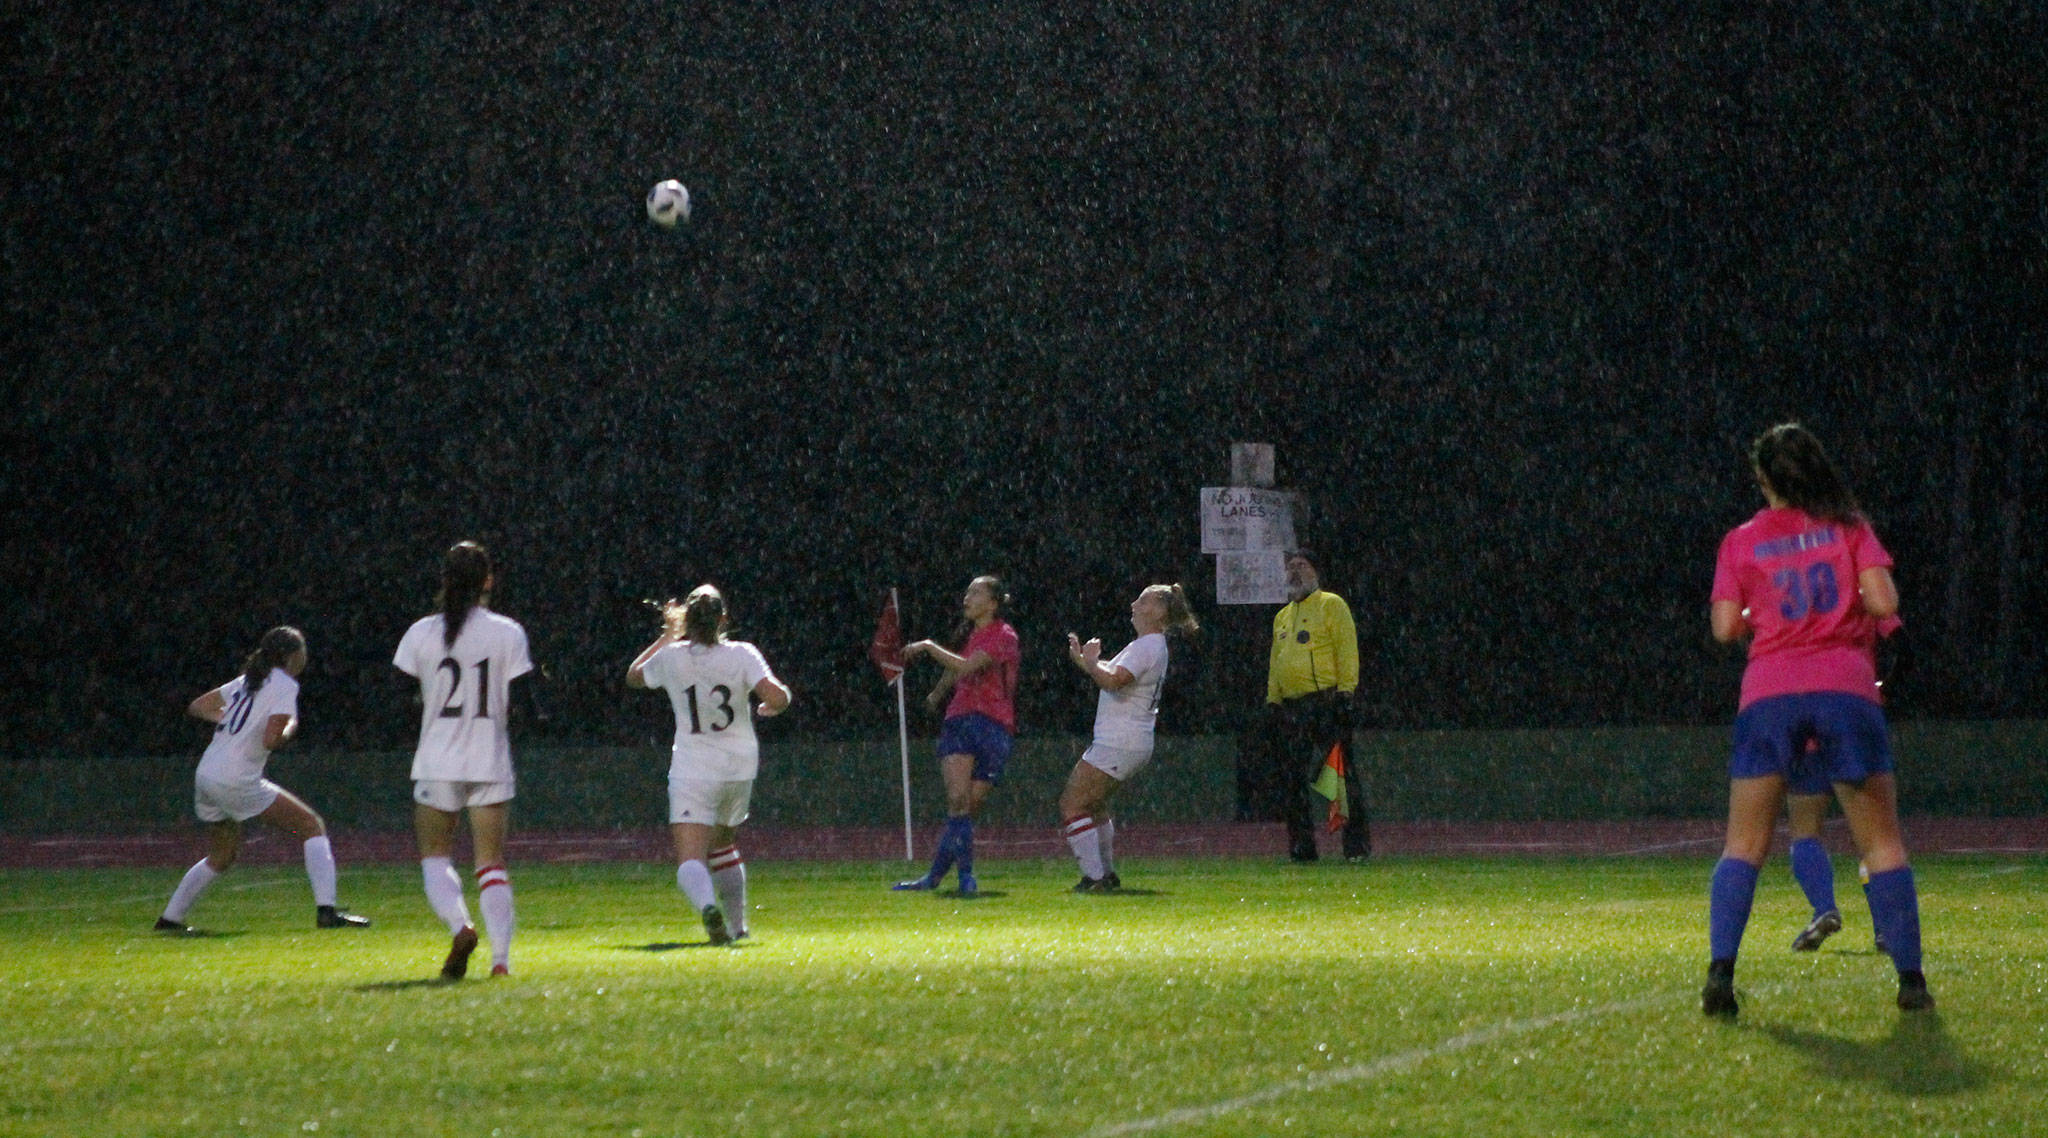 Rain drops and soccer balls fell out of the sky in Monday’s match between Coupeville and South Whidbey.(Photo by Jim Waller/Whidbey News-Times)